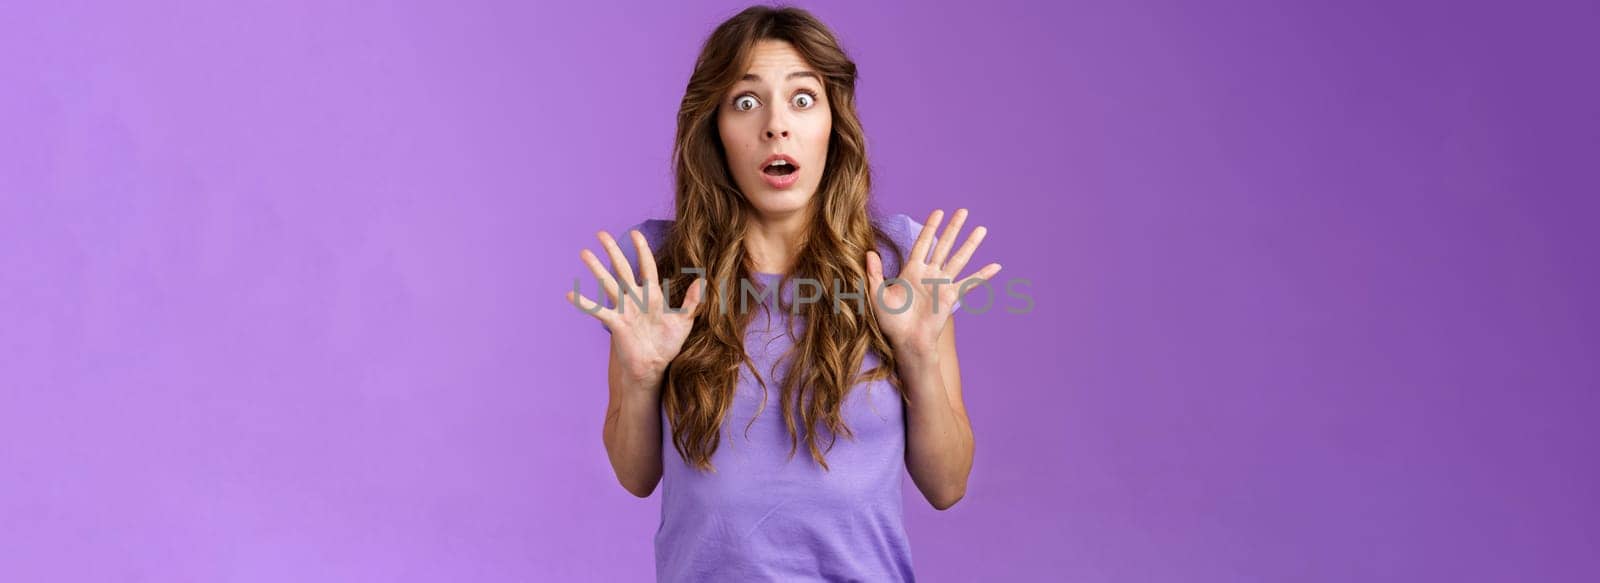 Ambushed shocked girl gasping not expect friend jump out corner raise palms surprised astonished drop jaw open mouth stunned stare camera impressed stupefied purple background. Copy space